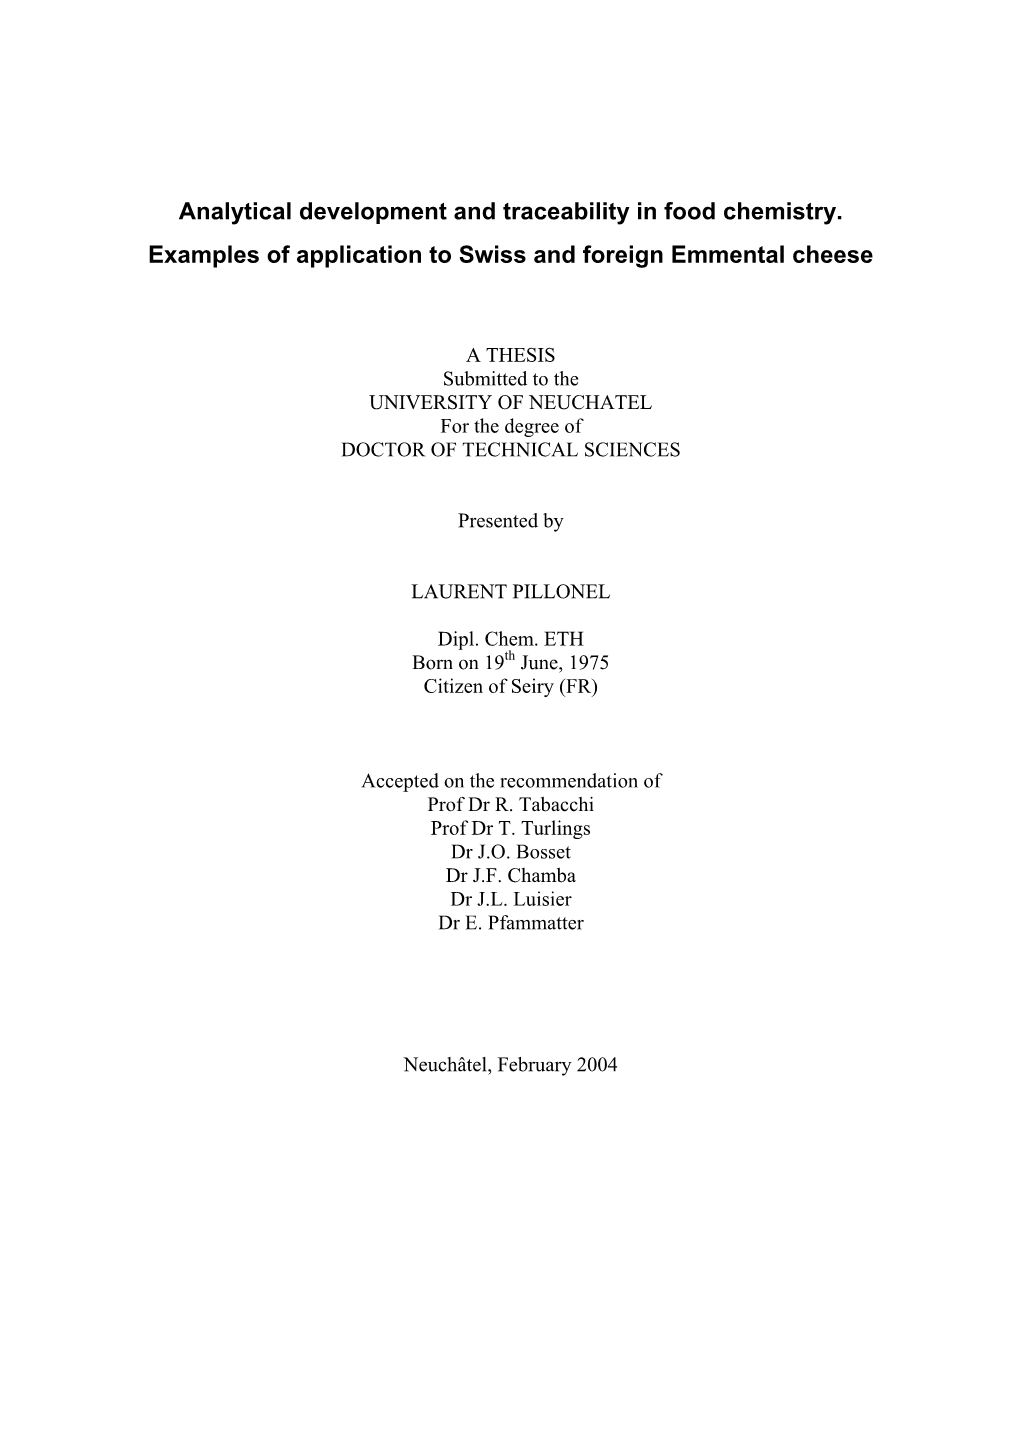 Analytical Development and Traceability in Food Chemistry